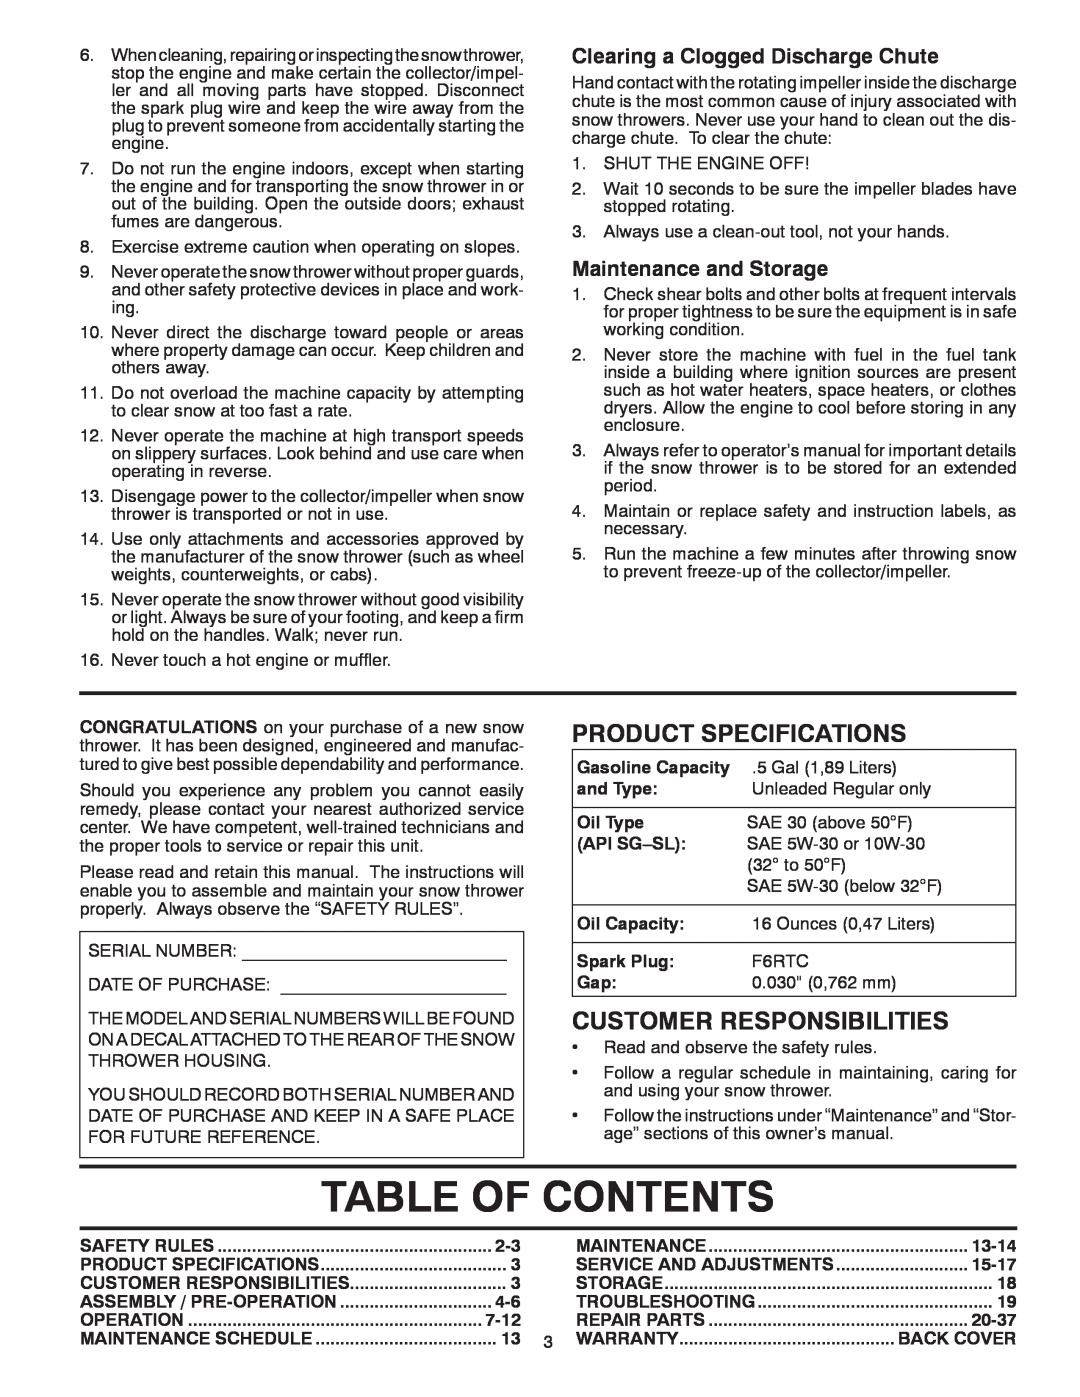 McCulloch 96192004001 Table Of Contents, Product Specifications, Customer Responsibilities, Maintenance and Storage, 13-14 